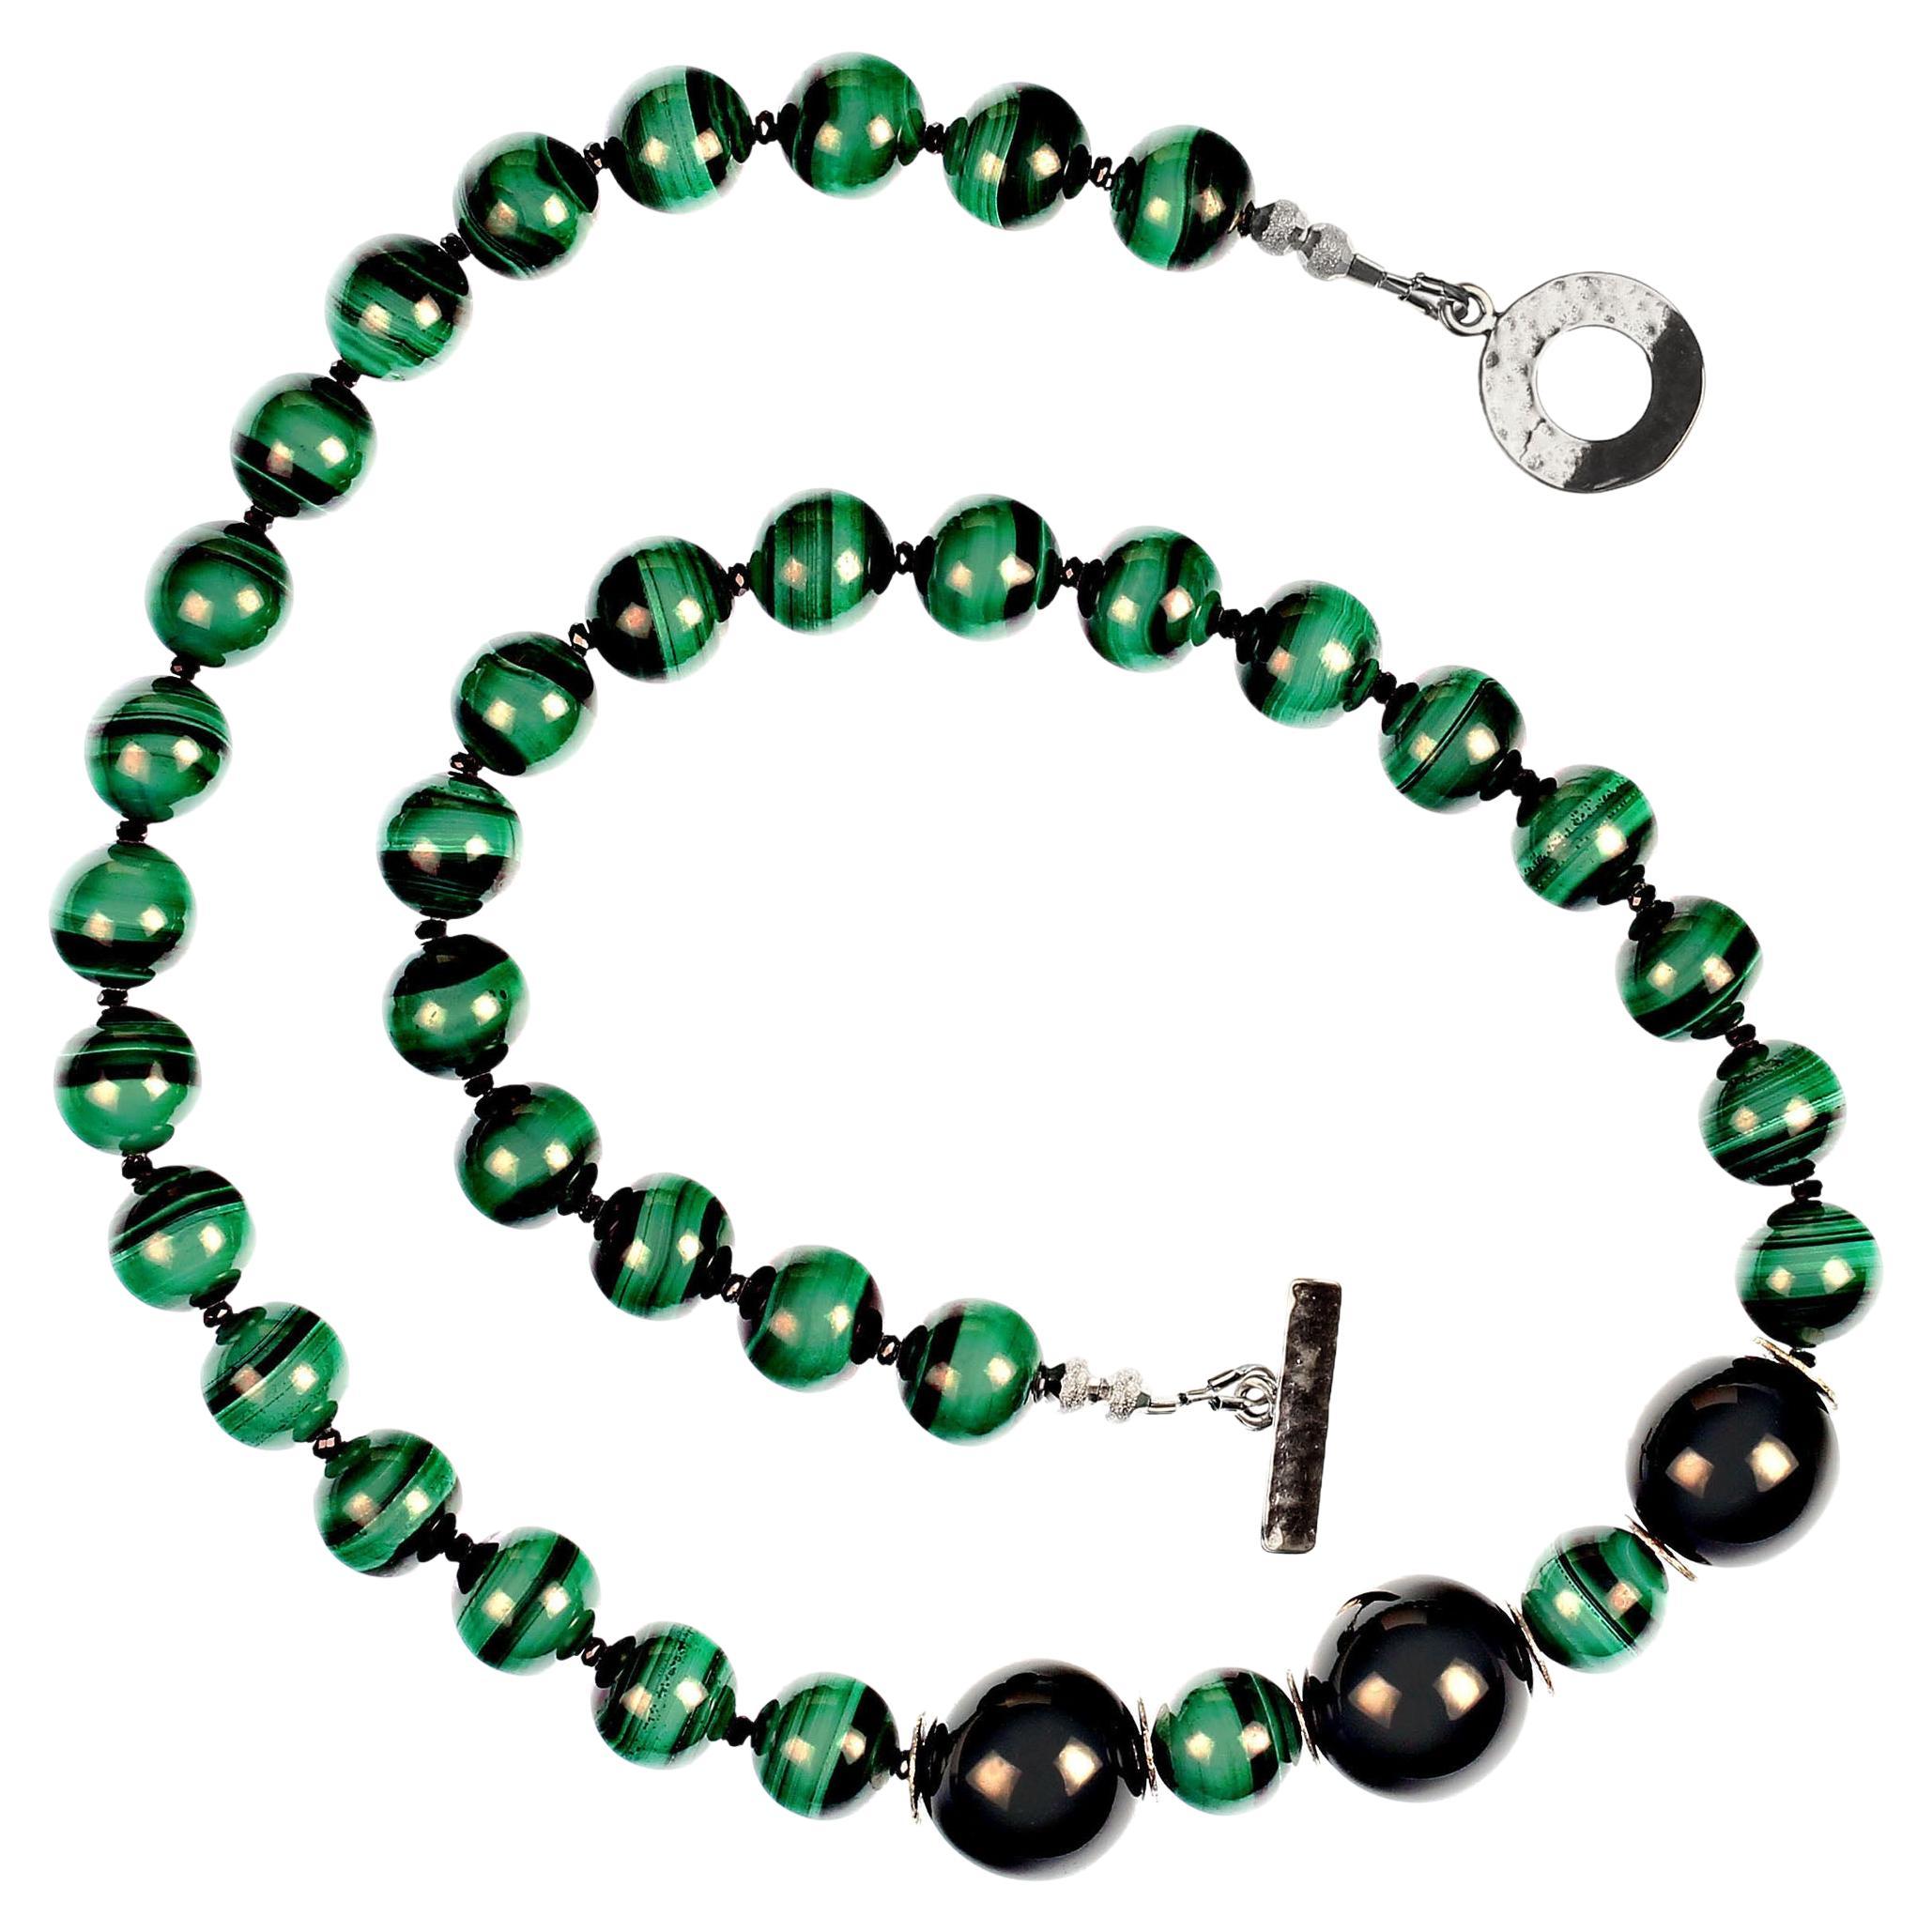 Artisan AJD Magnificent Malachite 20 inch necklace with Spinel and Onyx  Great Gift! For Sale